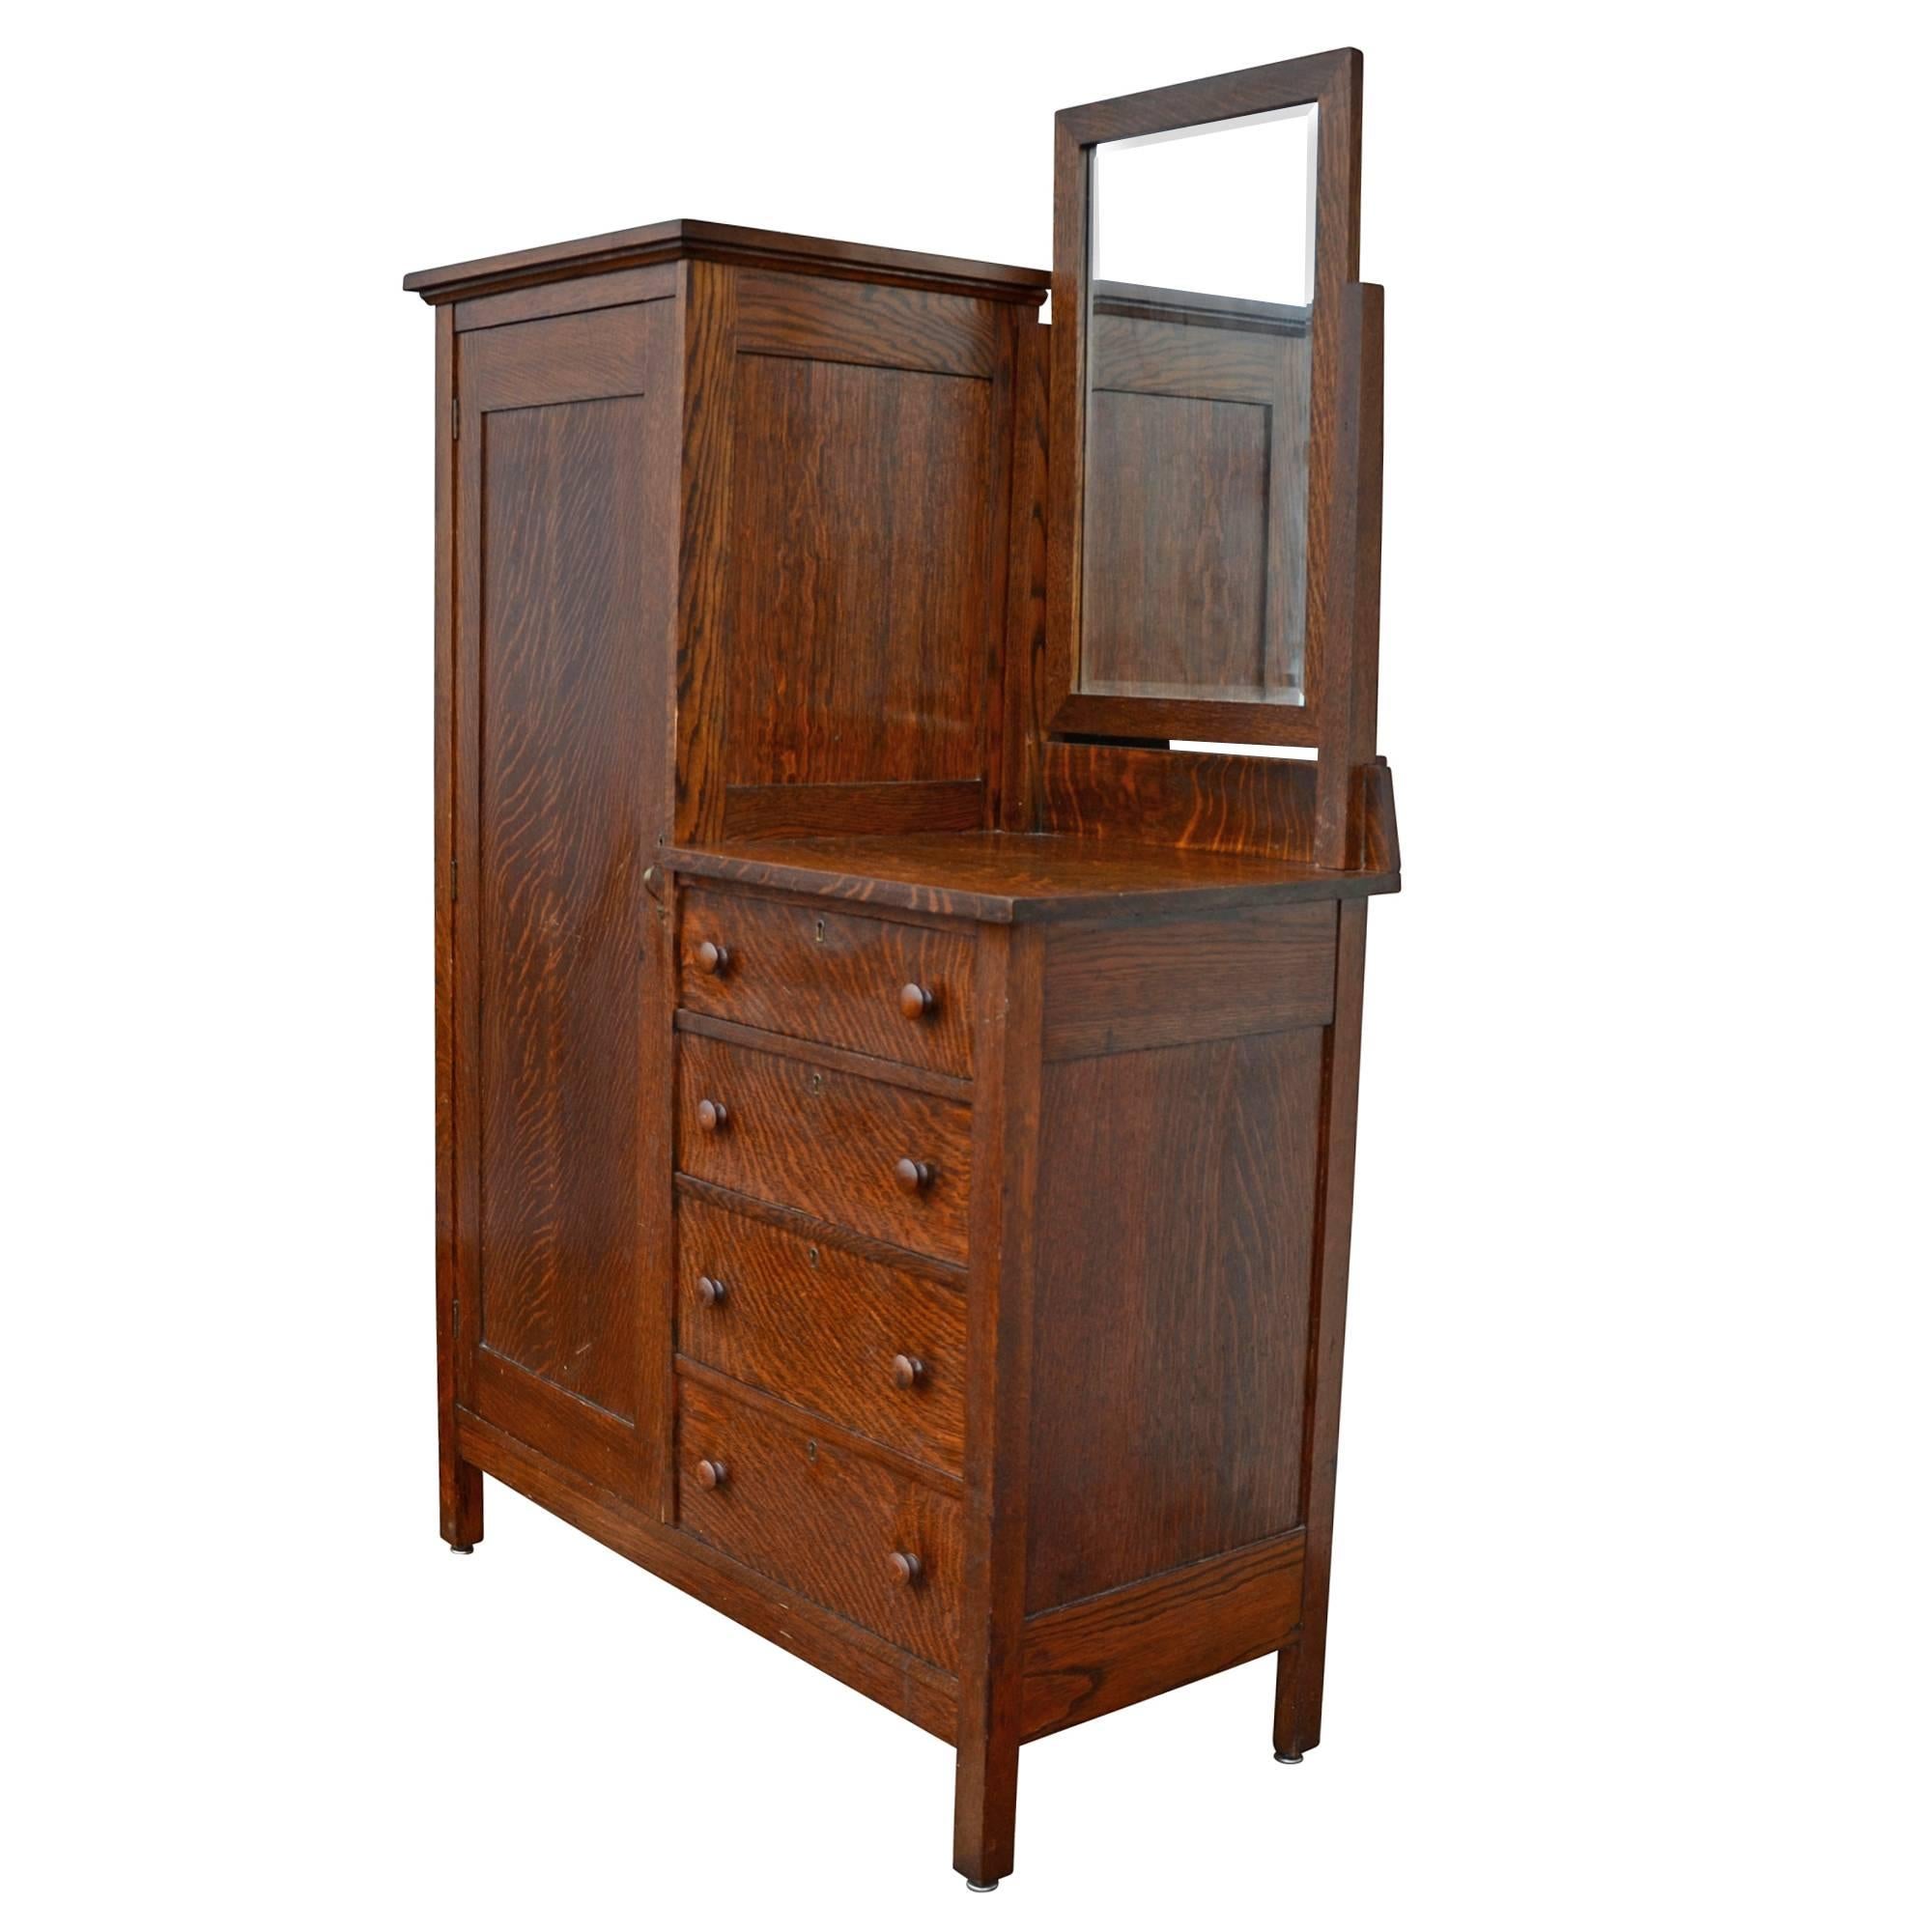 It's the sort of cabinet we pine for – although it's made of solid oak. Pictured here is a rare bird: standing 5' 8